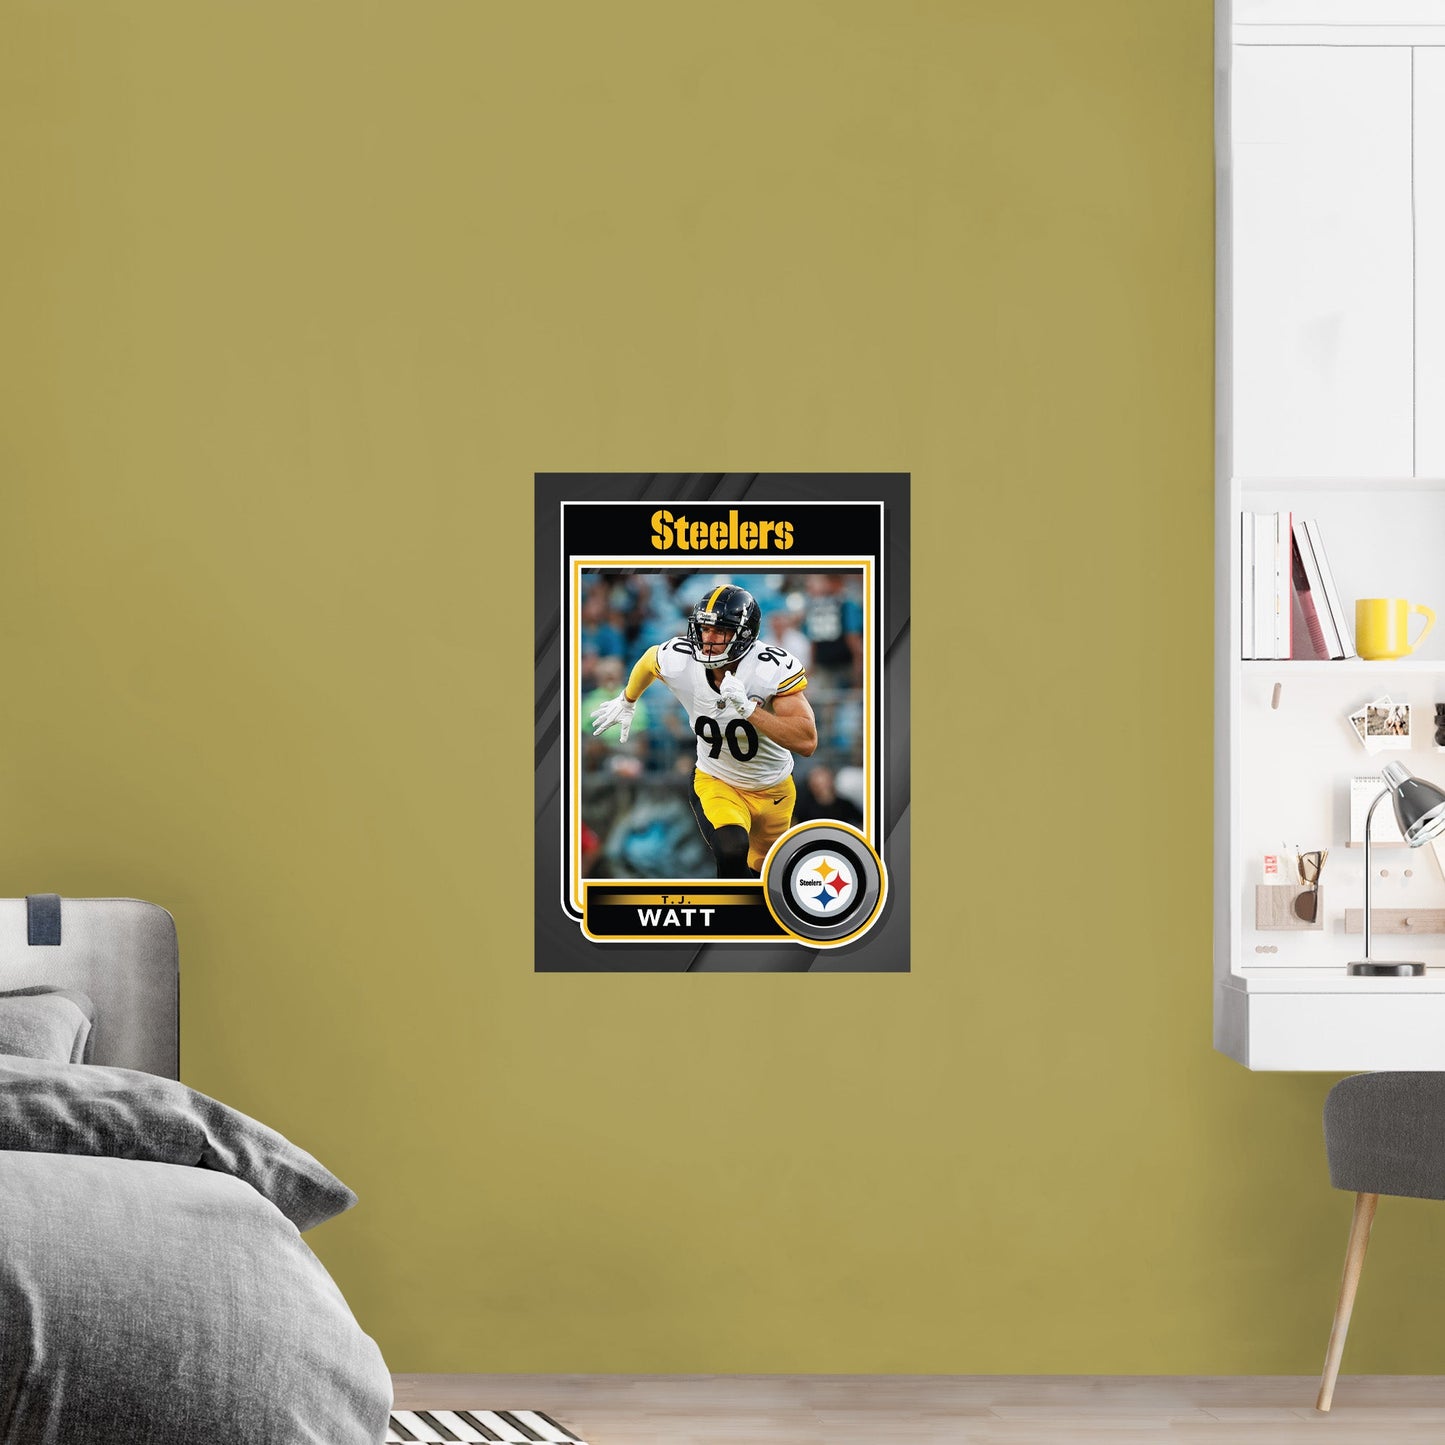 Pittsburgh Steelers: T.J. Watt Poster - Officially Licensed NFL Removable Adhesive Decal